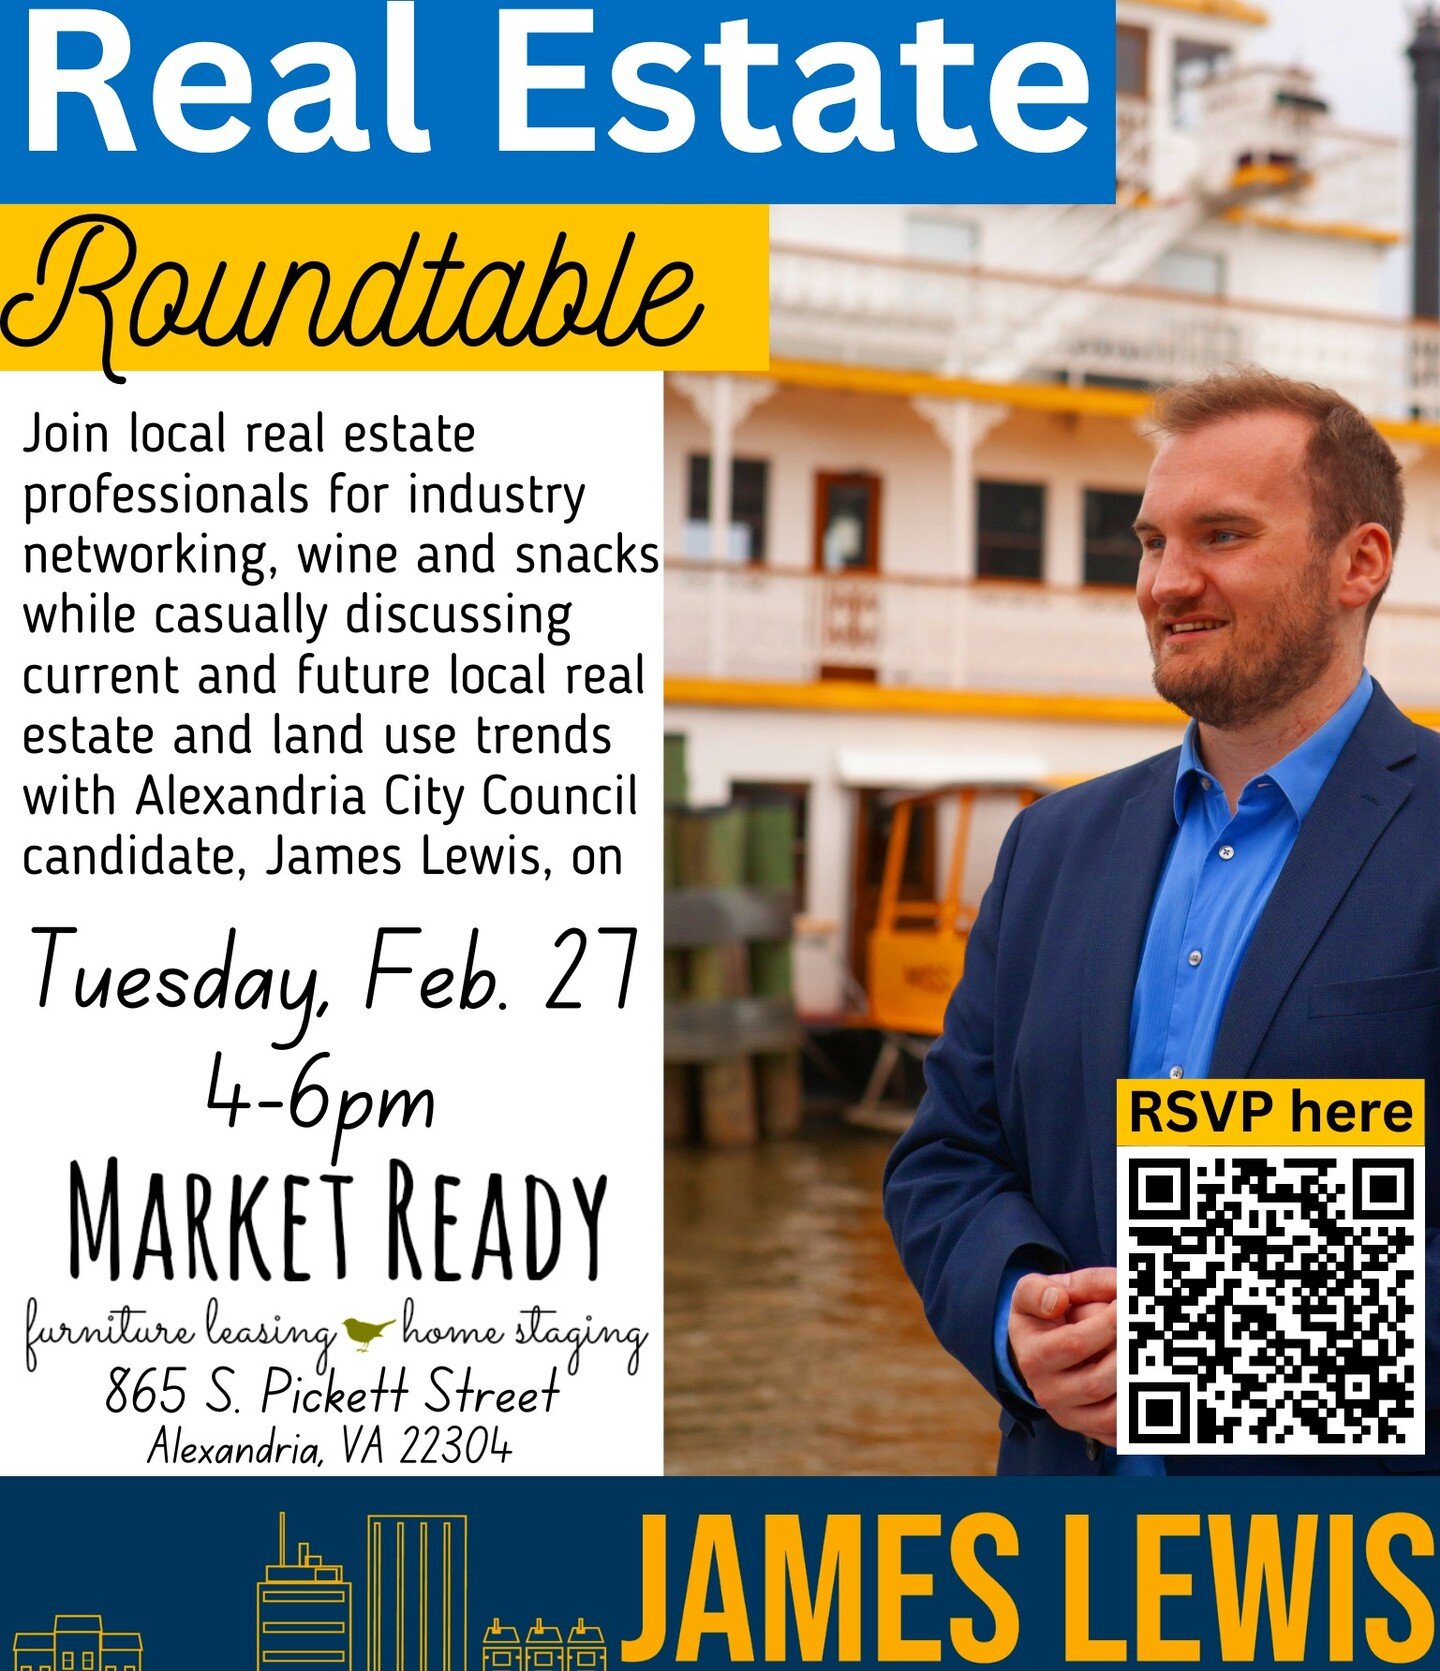 REALTORS Save the Date &ndash; TUESDAY, FEBRUARY 27th
Market Ready Staging Solutions is pleased to host a REAL ESTATE ROUNDTABLE with Alexandria City Council Candidate, James Lewis.

Since our move 2 years ago to our expanded, beautiful 20,000 sq. ft